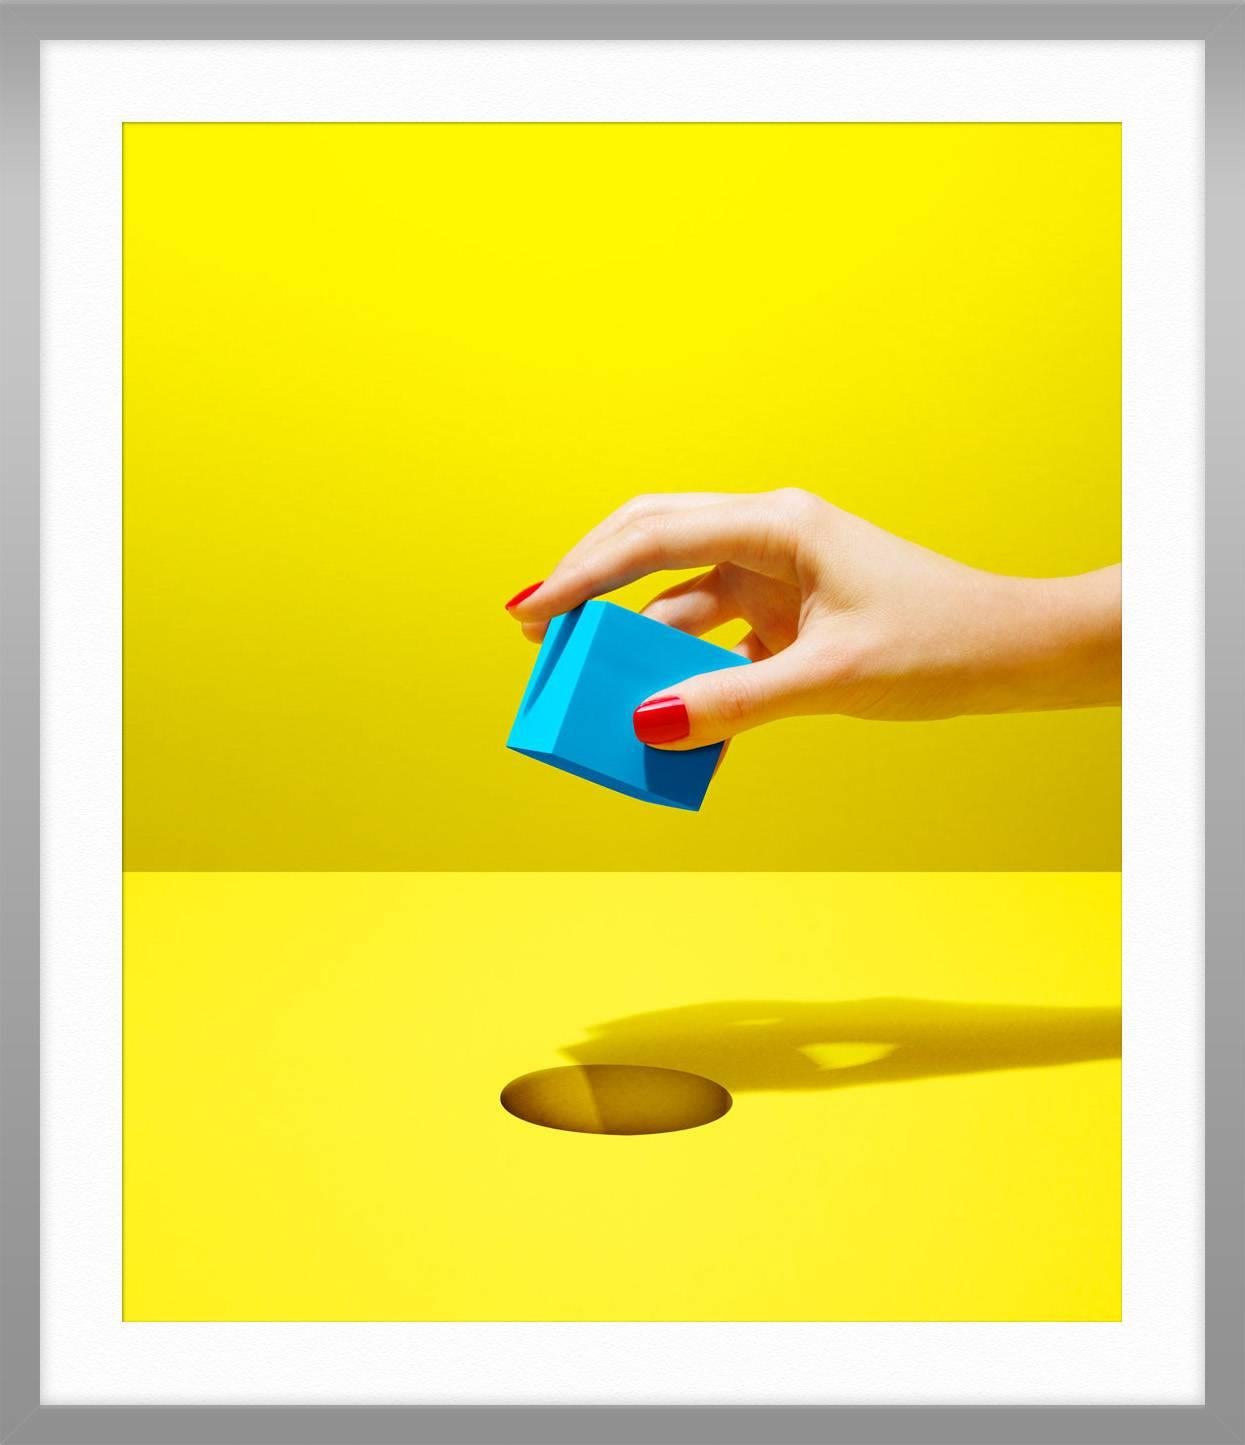 ABOUT THIS PIECE: Both pieces are meant to represent the idea of not recognizing who you are. Using simple shapes and a primary color palette the images are meant to be both simplistic yet challenging to the viewer to be analytical.

ABOUT THIS